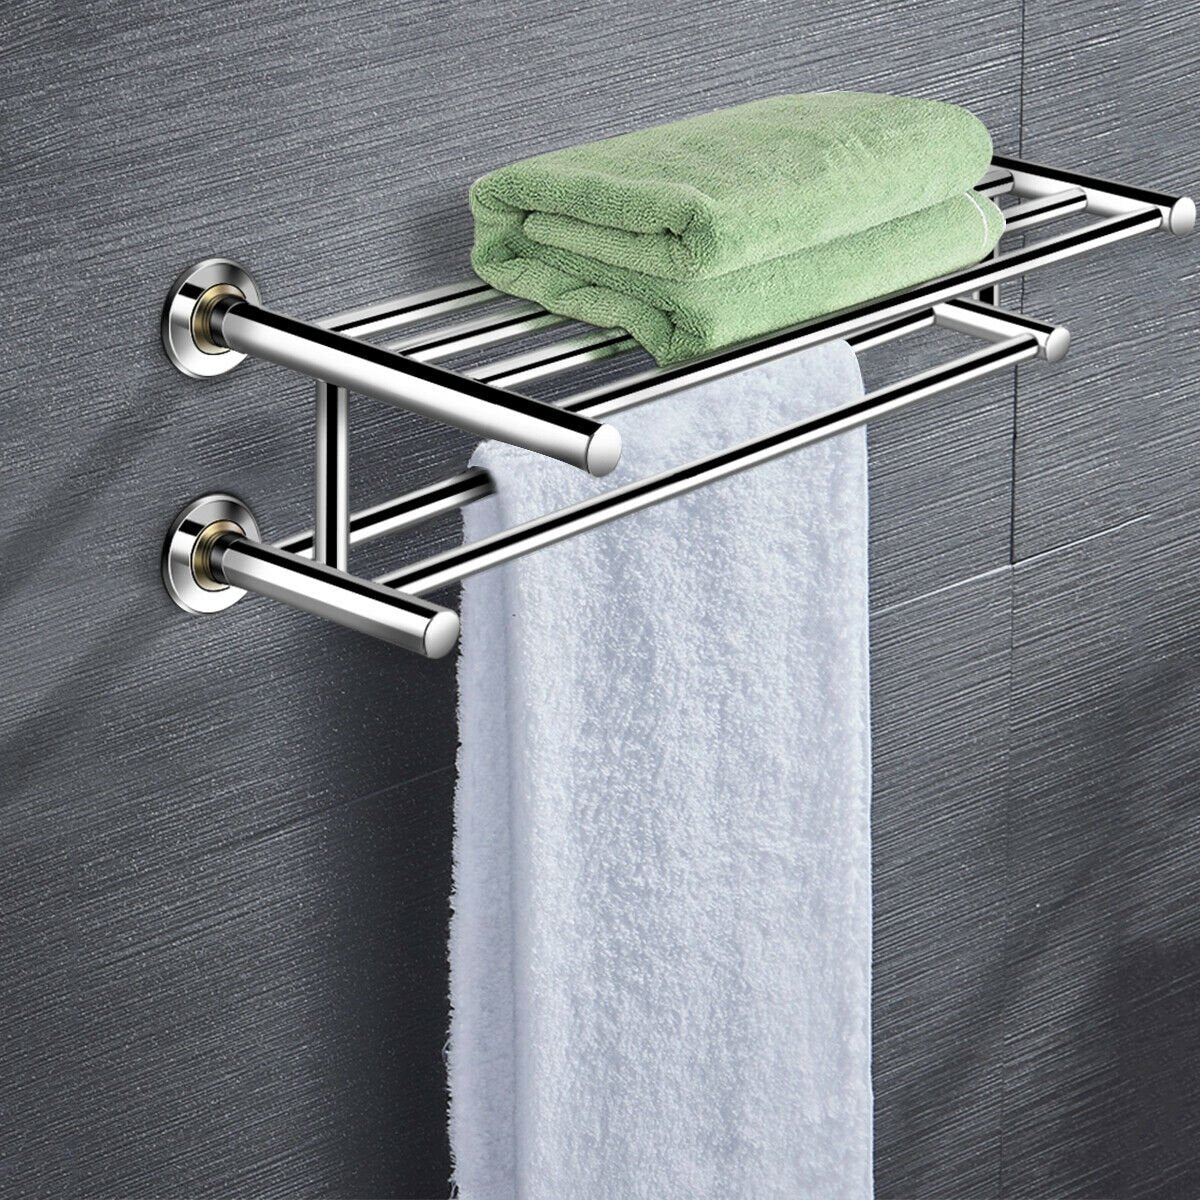 24 Inch Wall Mounted Stainless Steel Towel Storage Rack with 2 Storage Tier, Silver